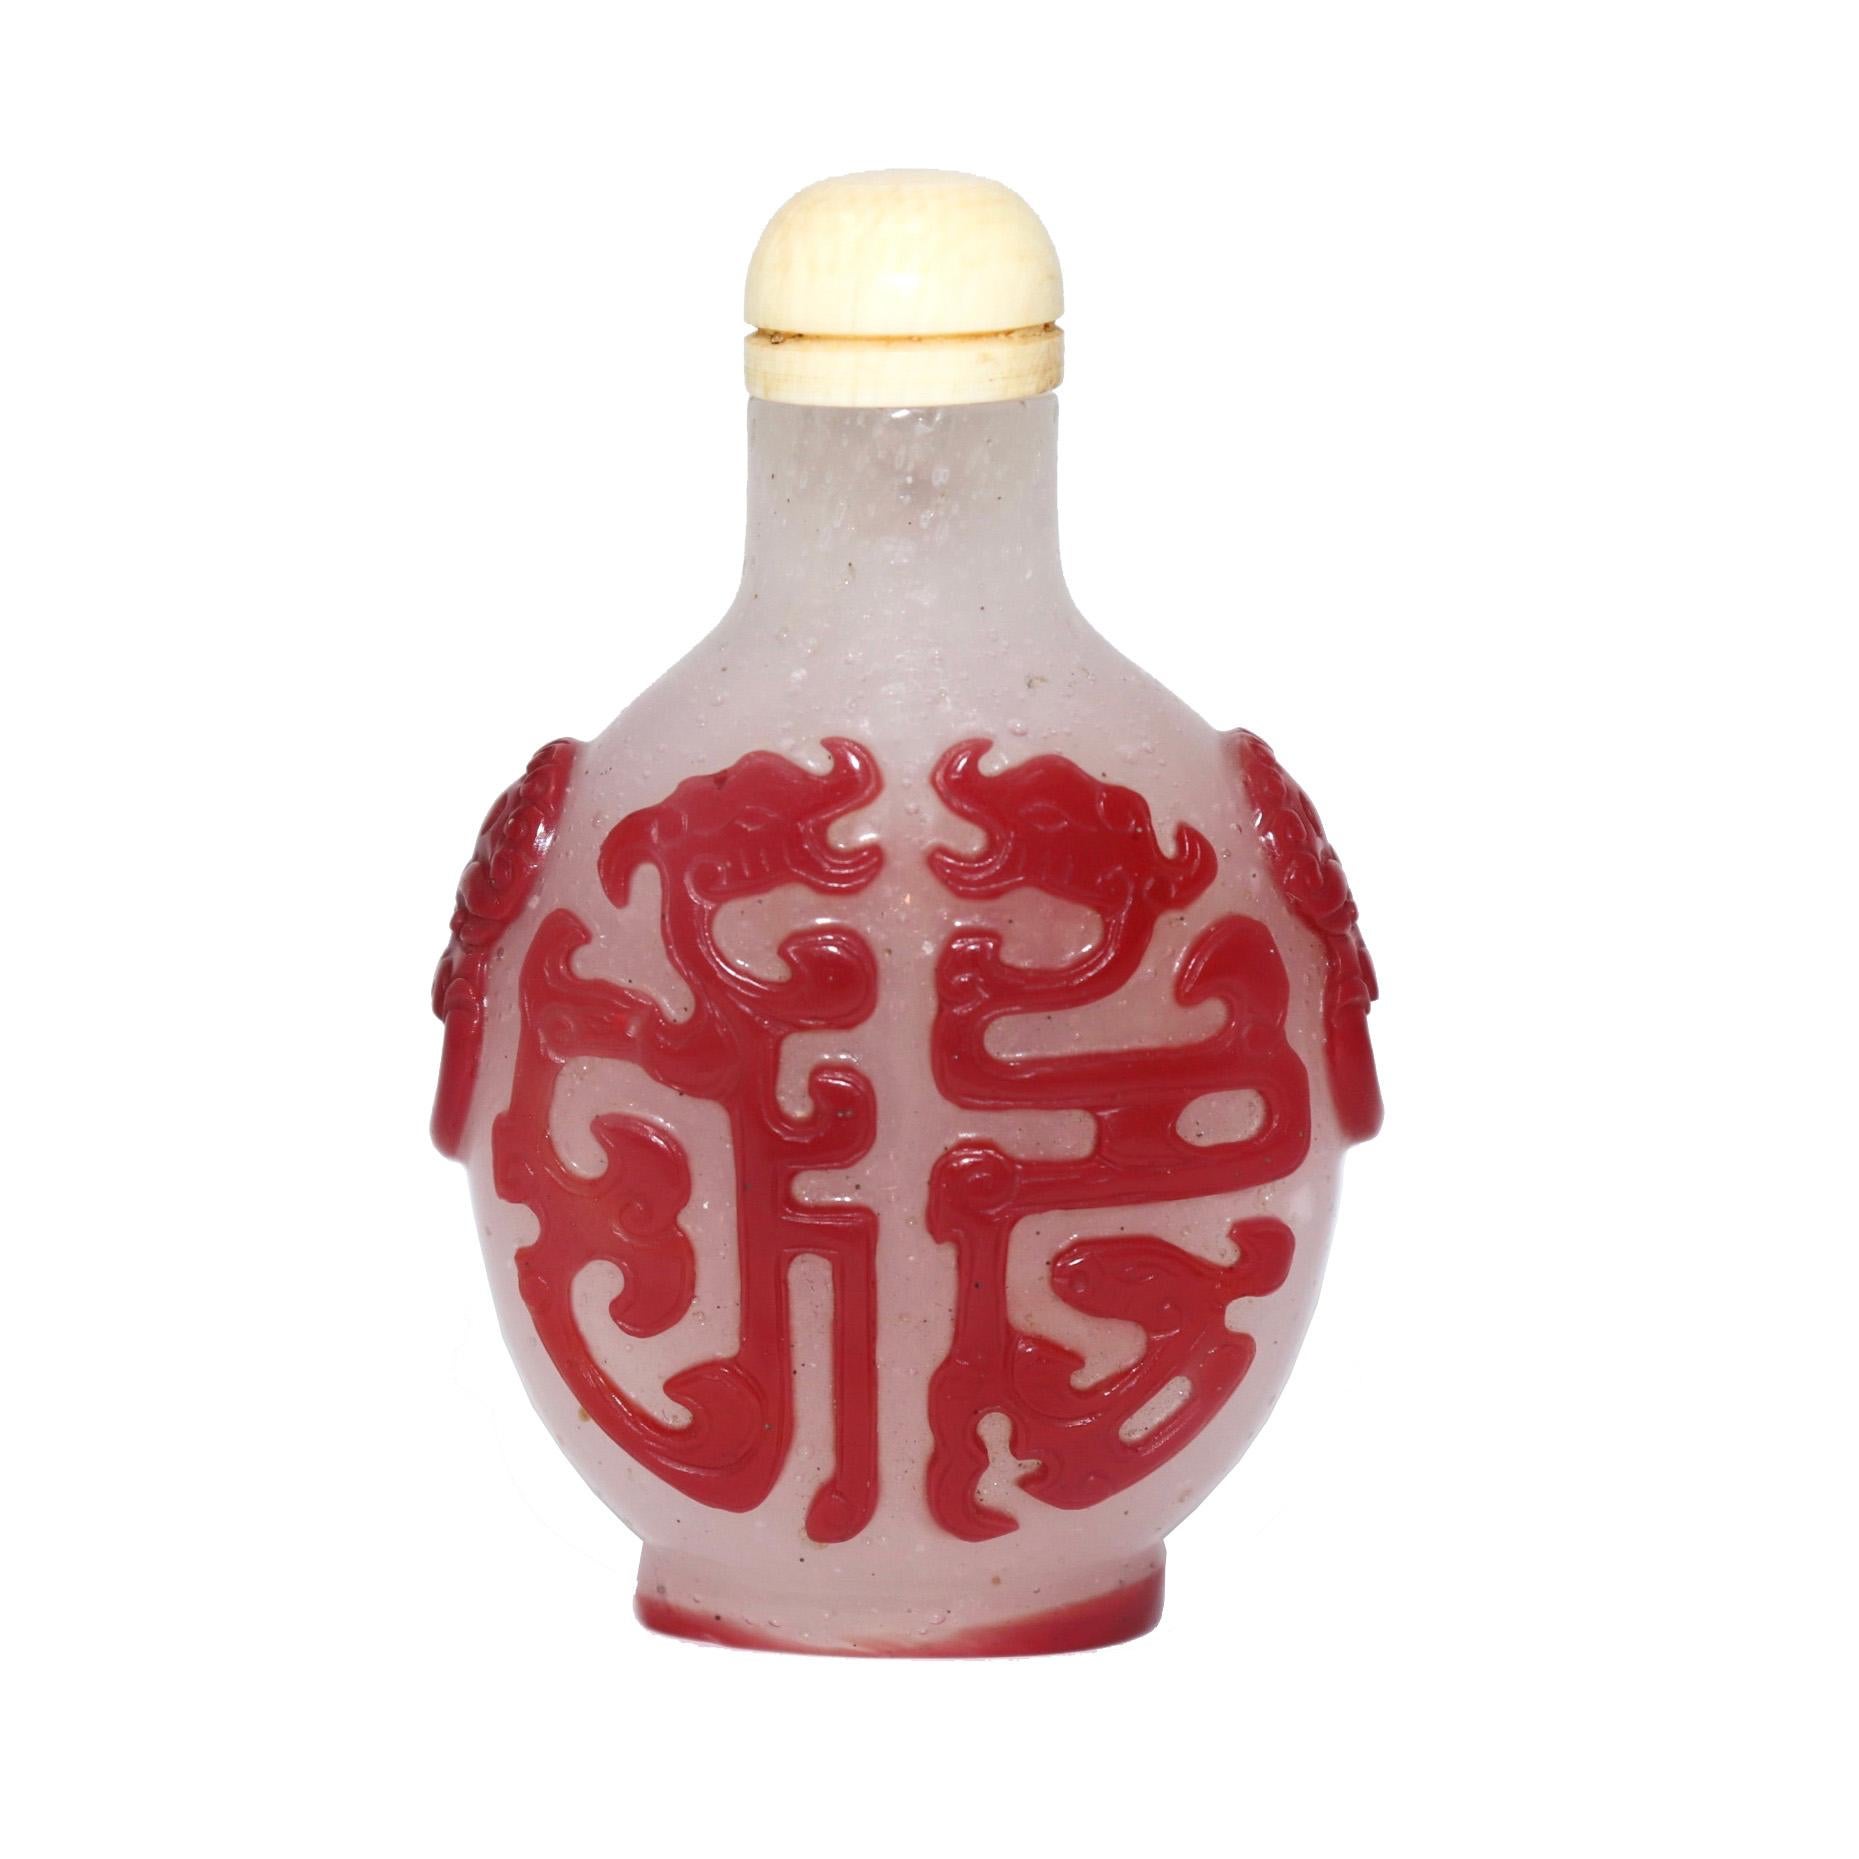 Antique Chinese peking red overlay snowflake glass snuff bottle, of flattened ovoid shape with sloping shoulders, round neck, thin and flat mouth rim, raised oval foot and countersunk base, fine detailed carved decoration of Archaistic kui dragons